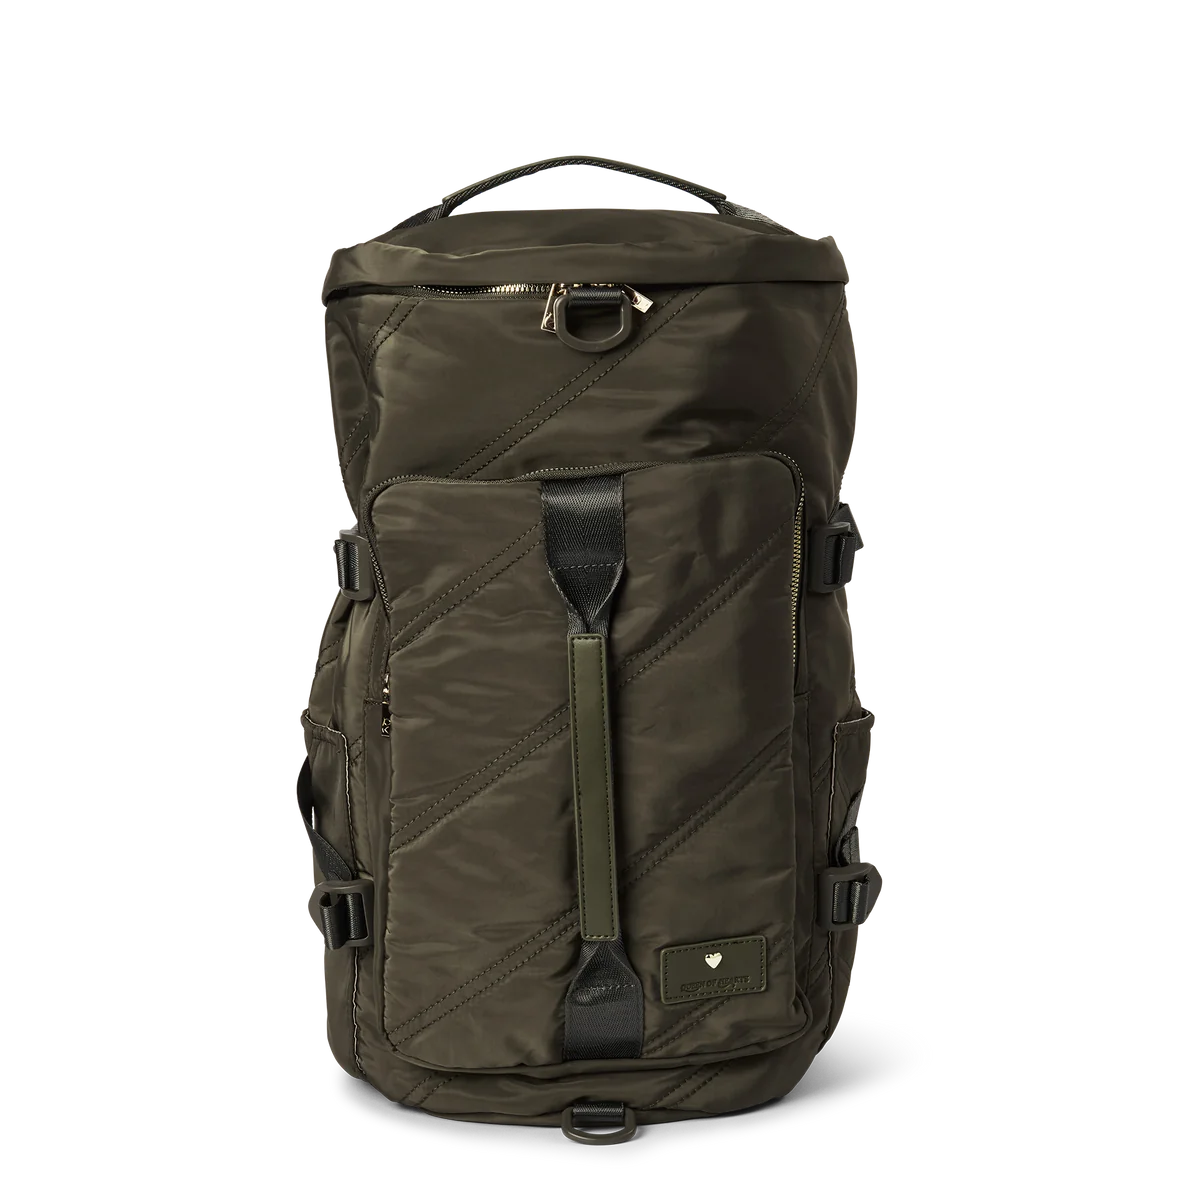 QUEEN OF HEARTS CORE 40L BACKPACK KHAKI